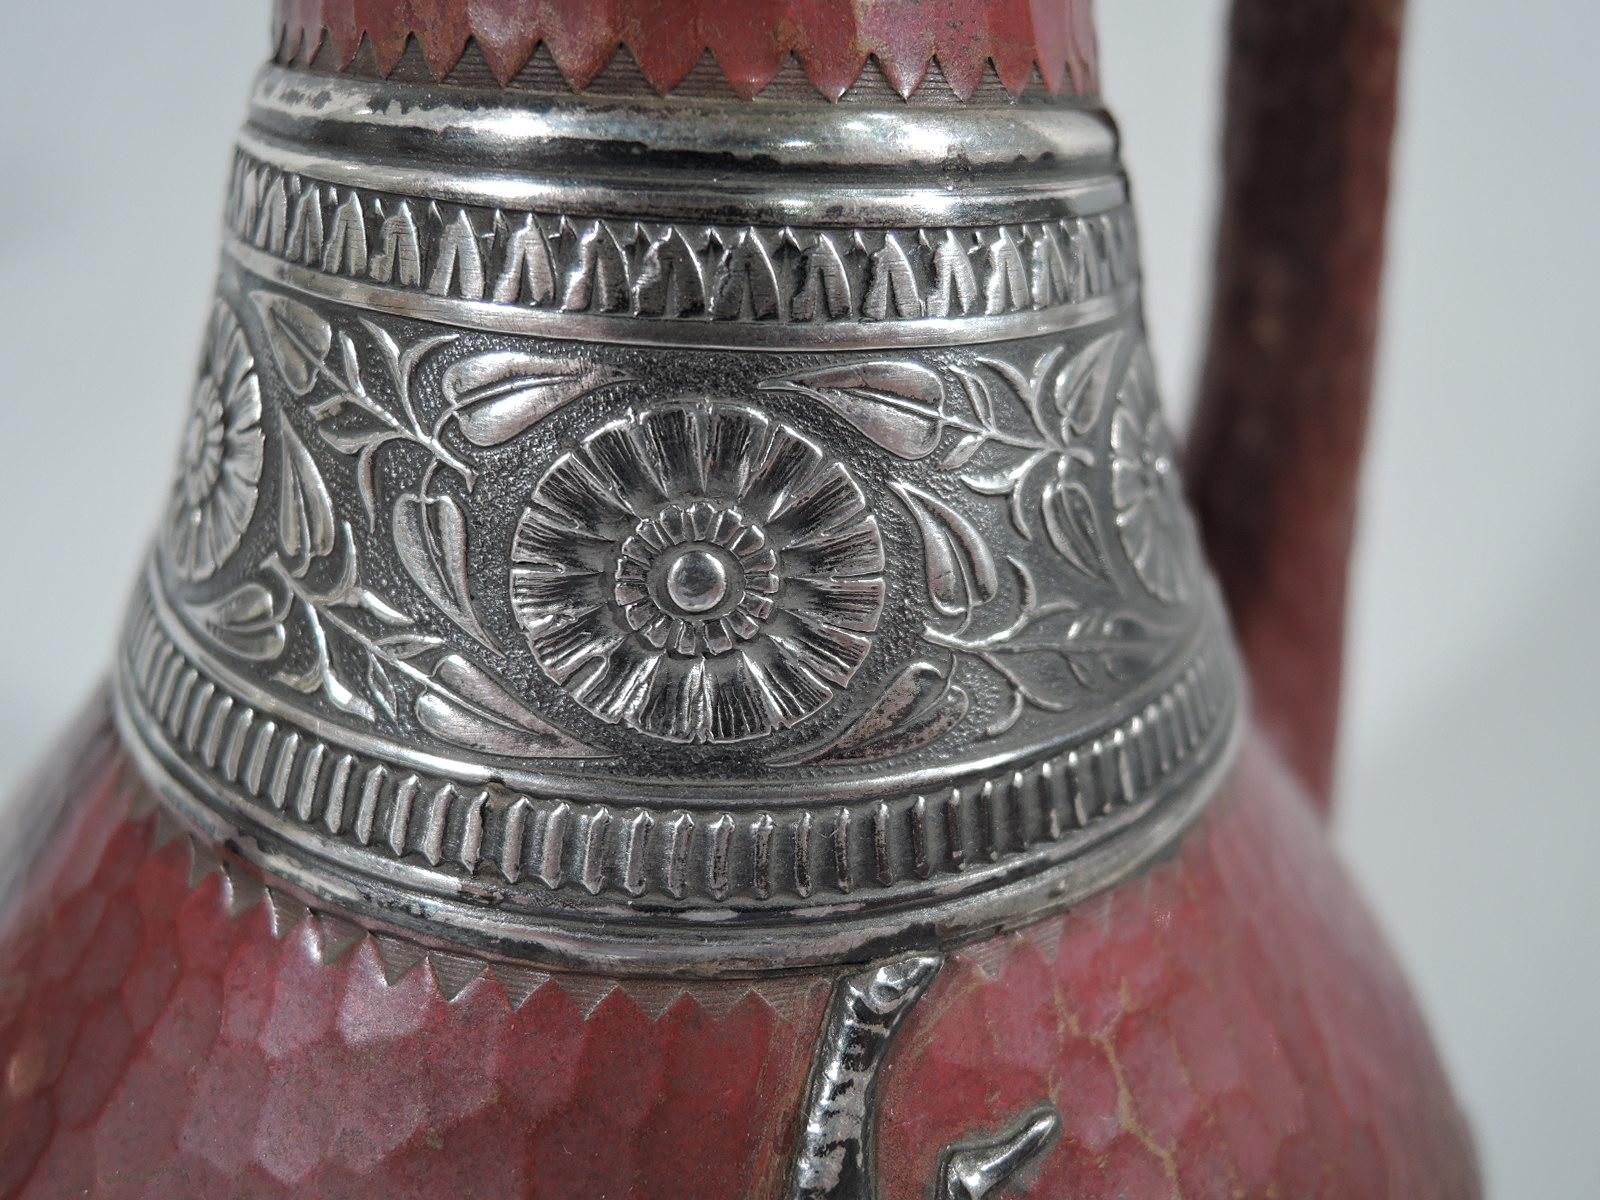 Late 19th Century Gorham Mixed Metal Copper and Silver Japonesque Turkish Coffeepot